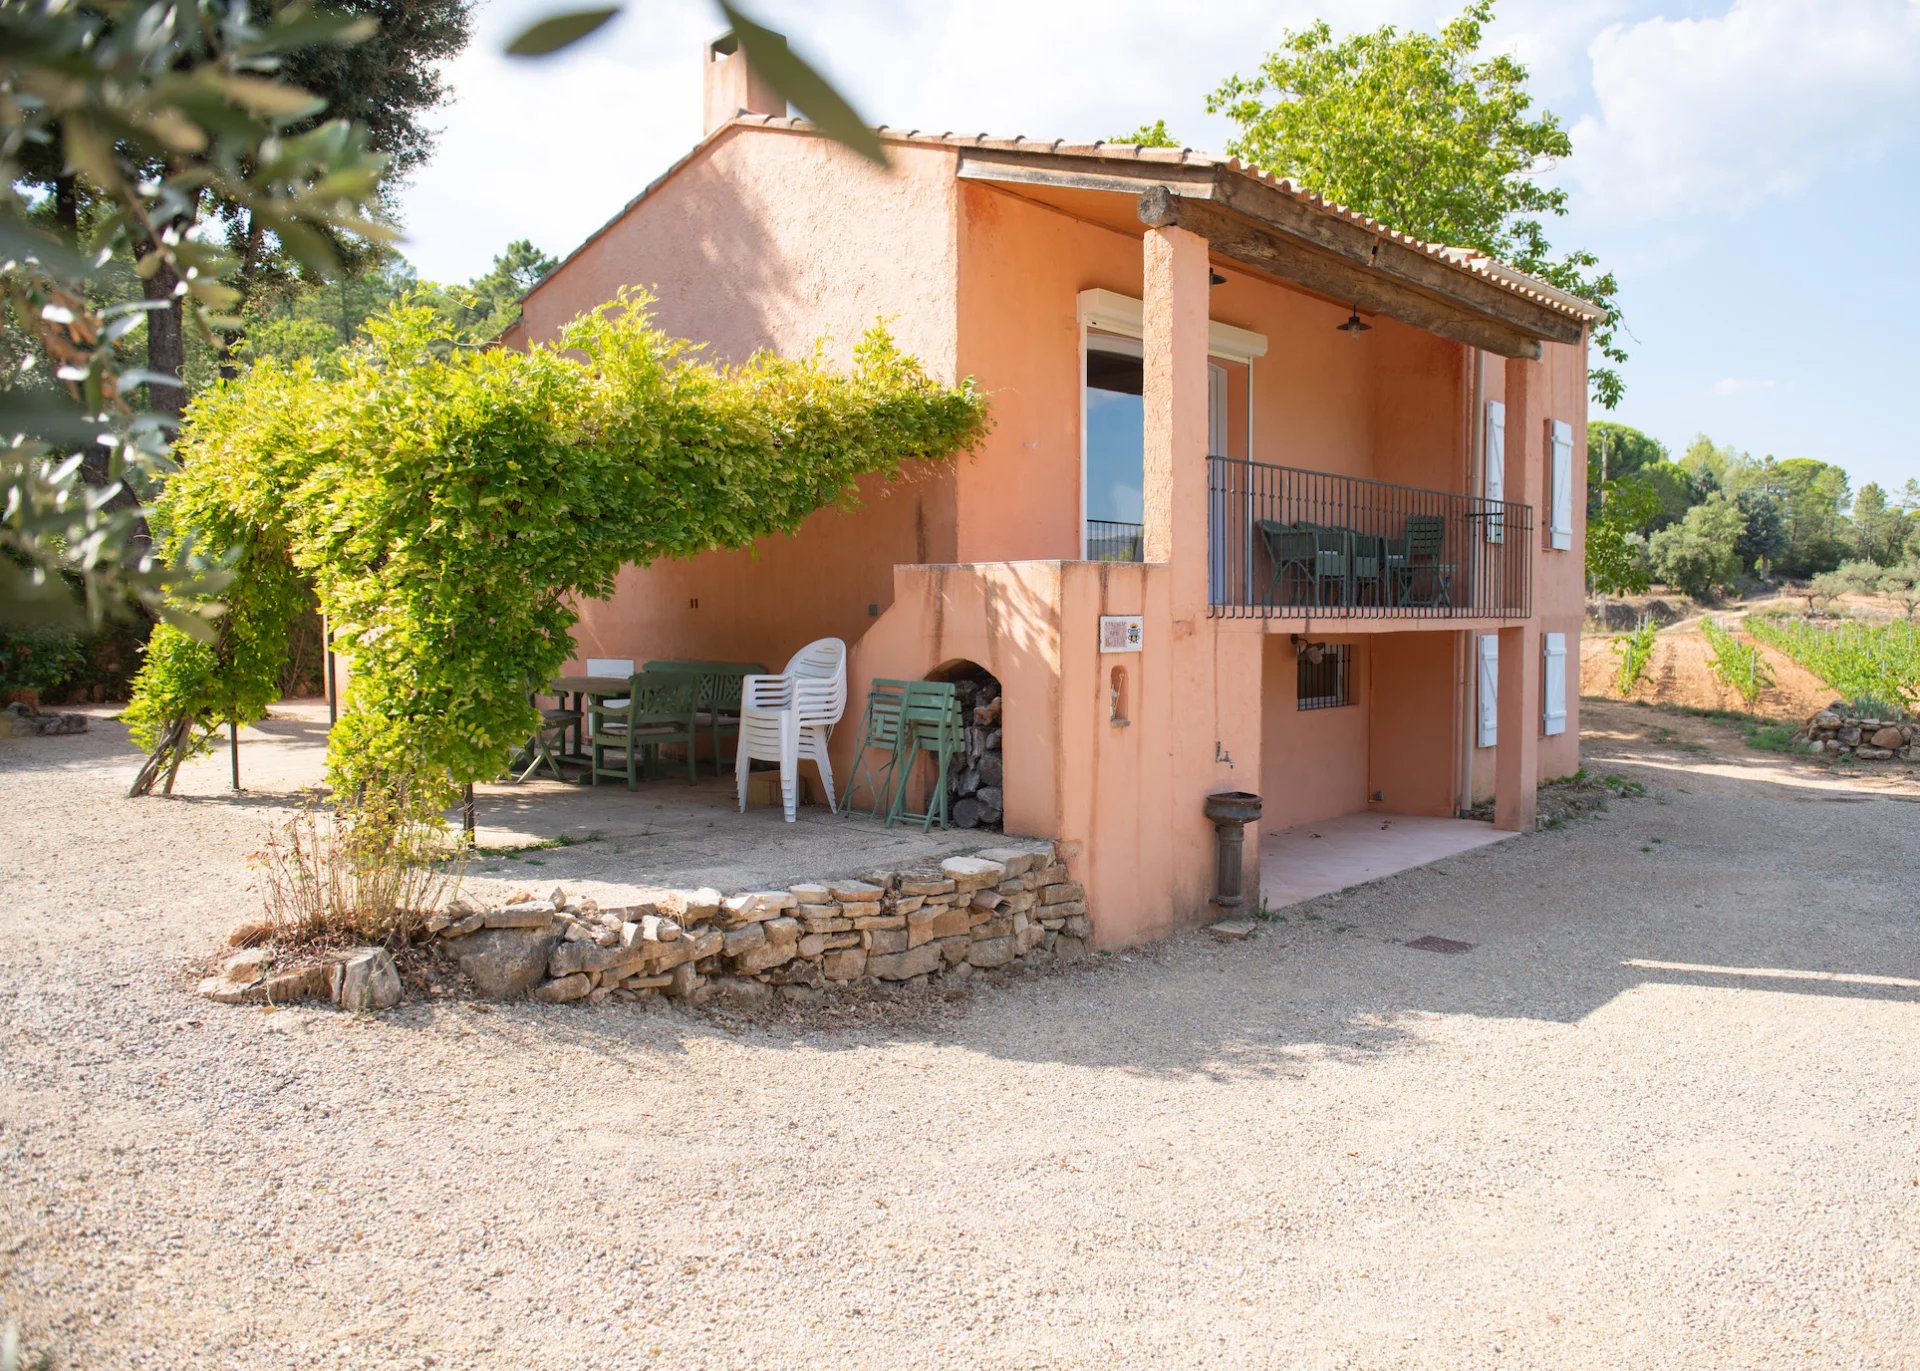 HOUSE - 15 MINUTES FROM COTIGNAC